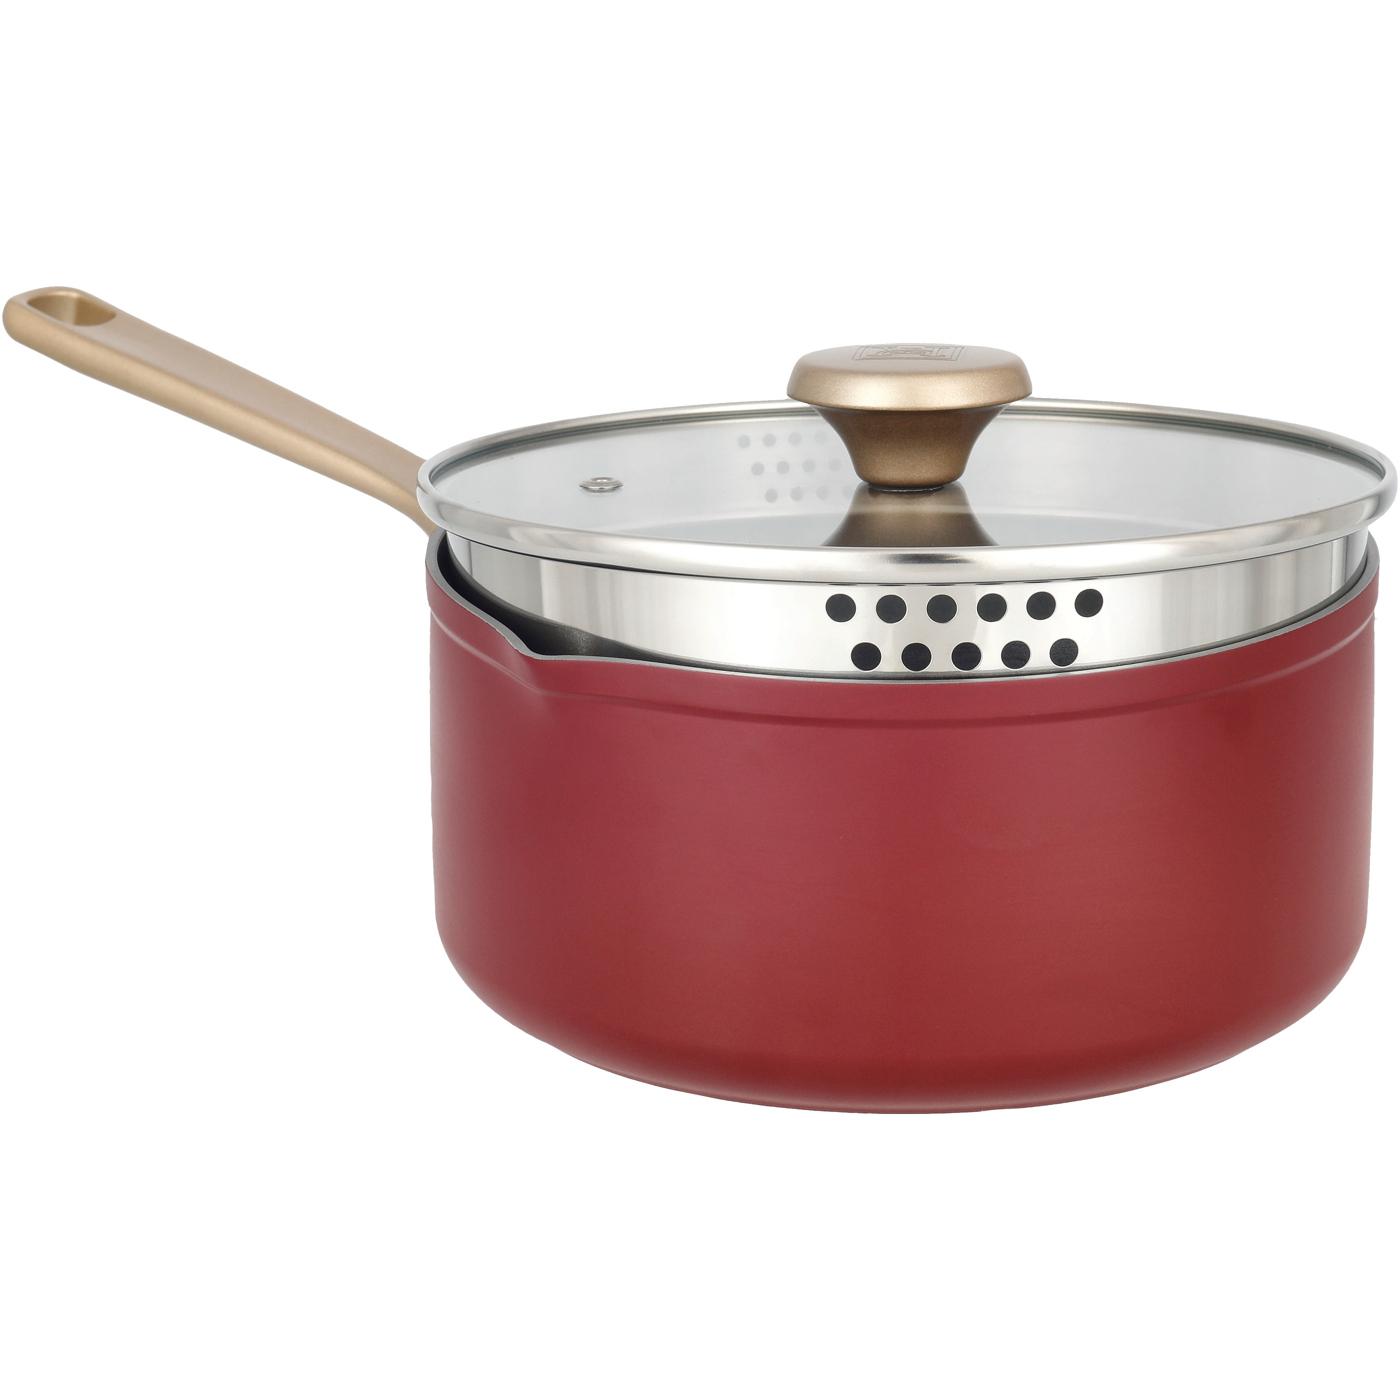 Kitchen & Table by H-E-B Non-Stick Saucepan - Bordeaux Red; image 3 of 7